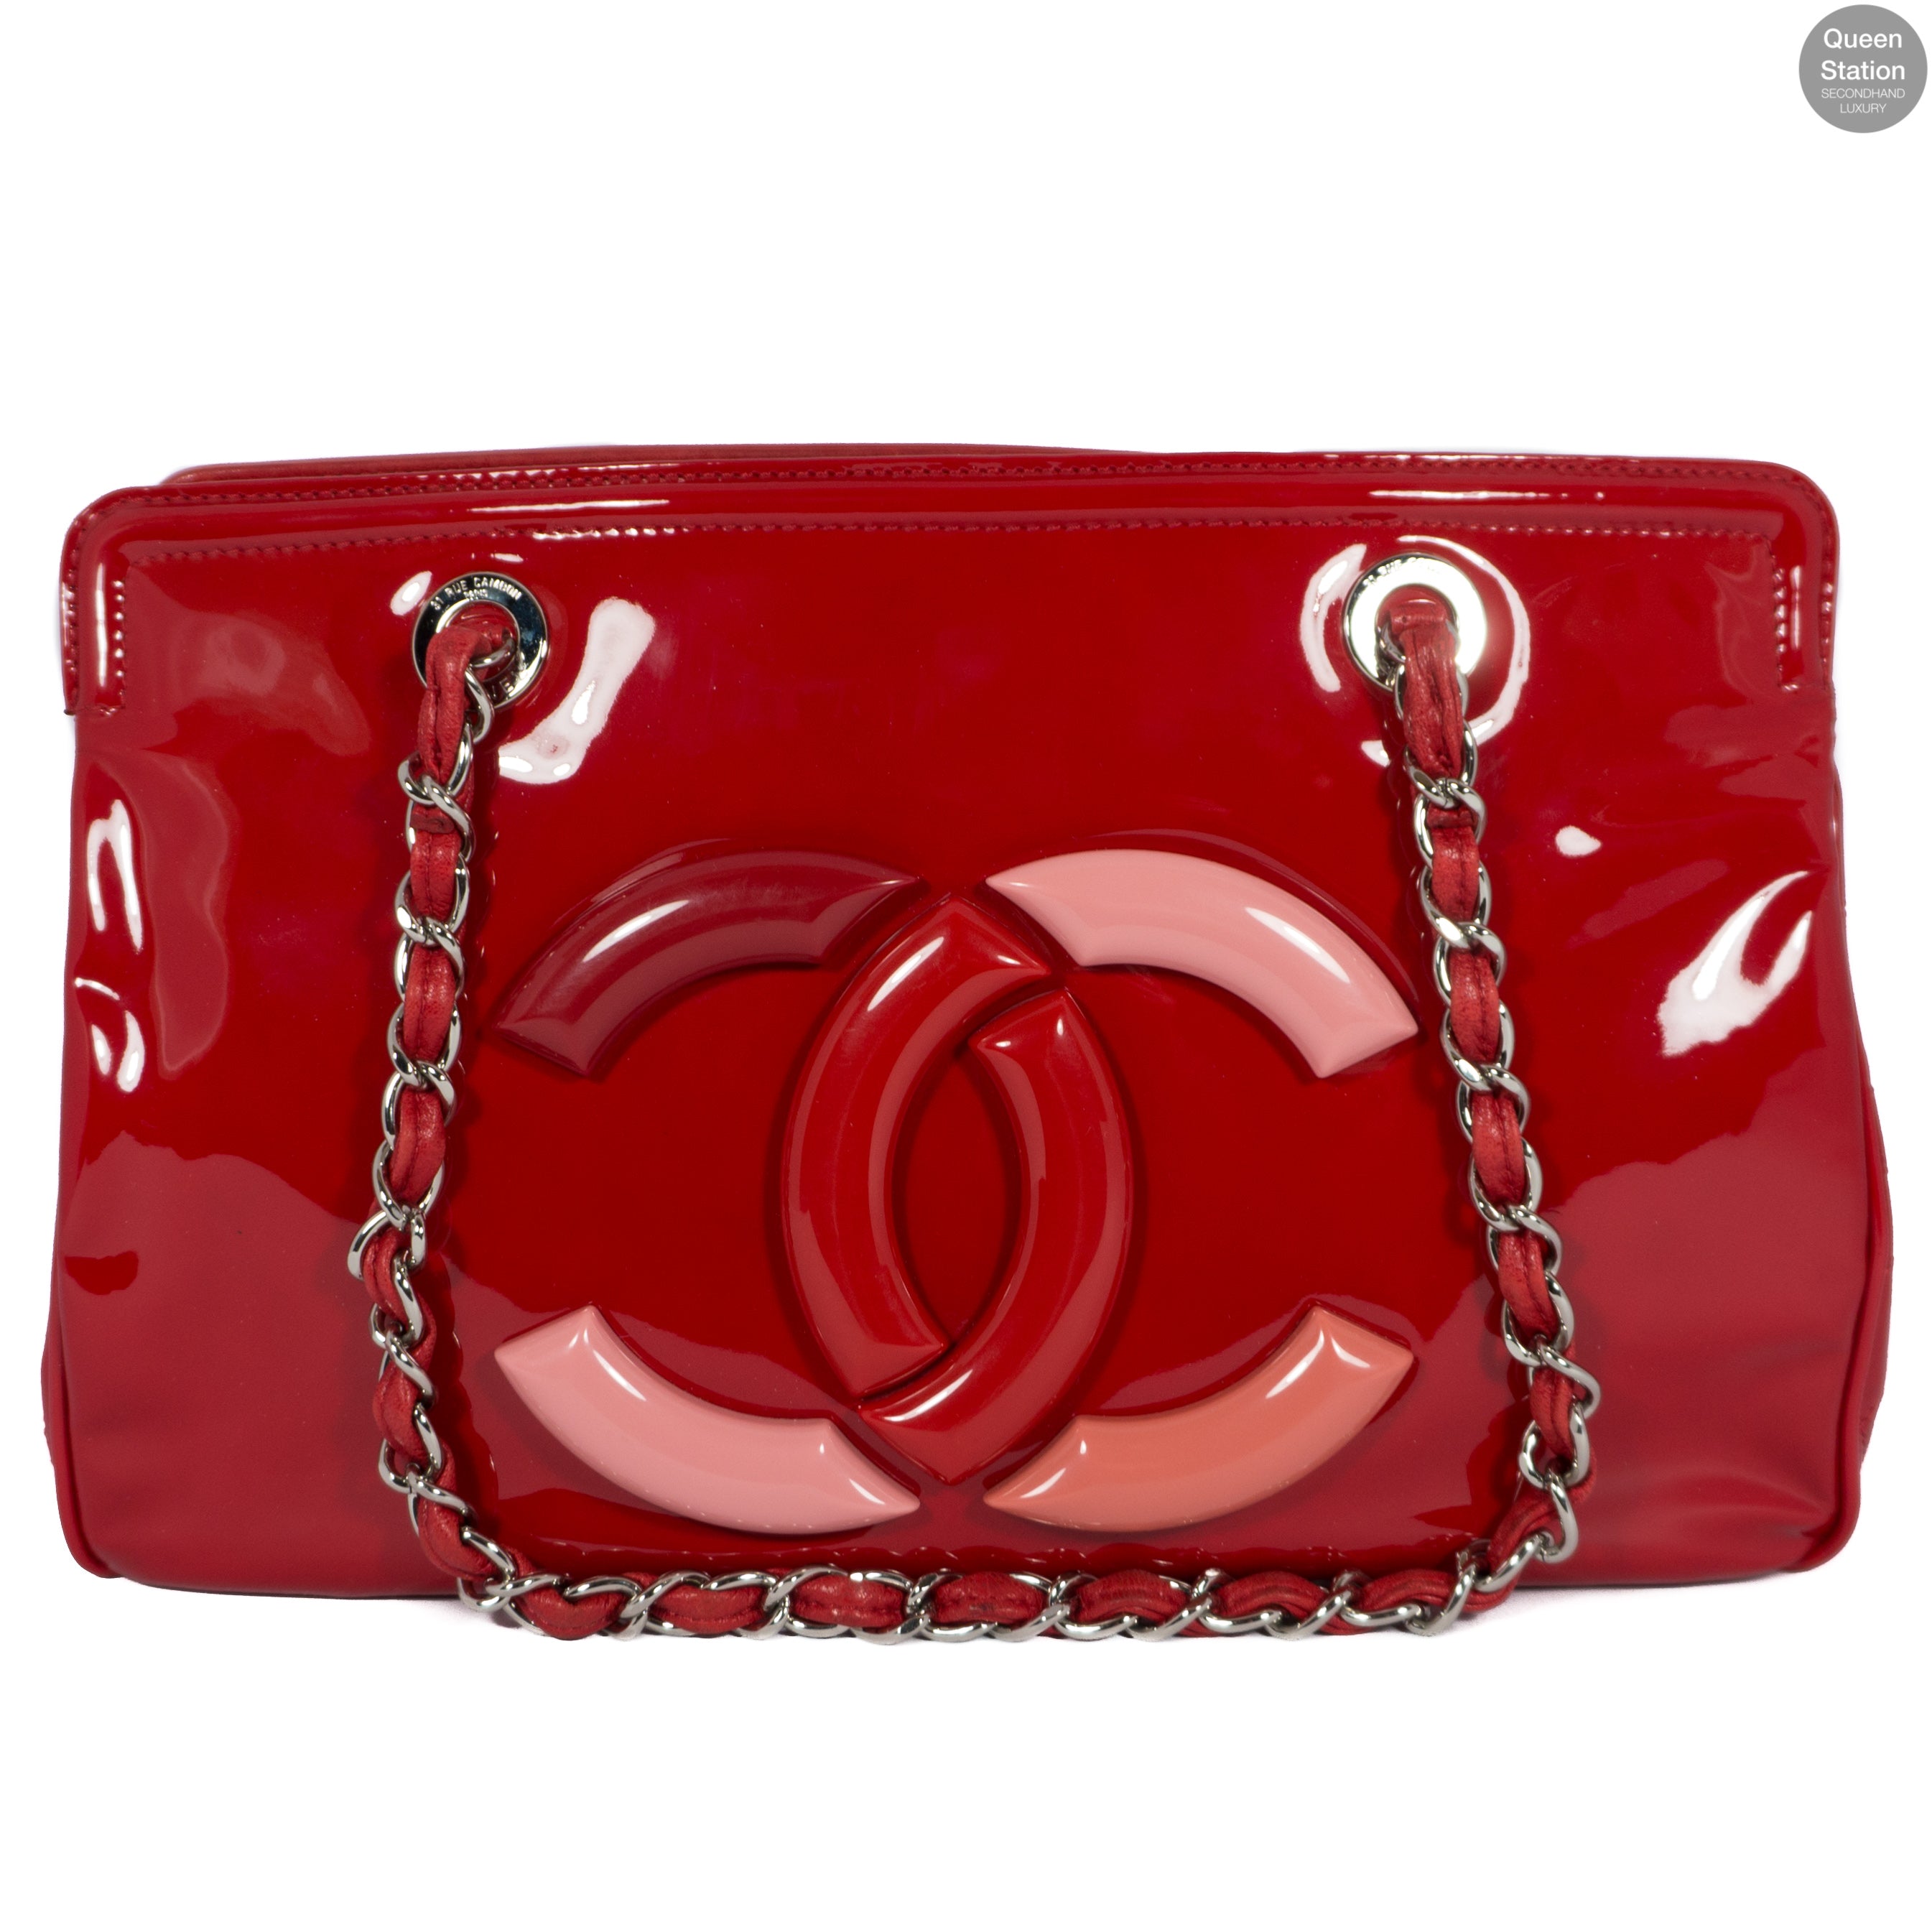 Chanel – Red Lipstick Patent Leather Tote Bag – Queen Station